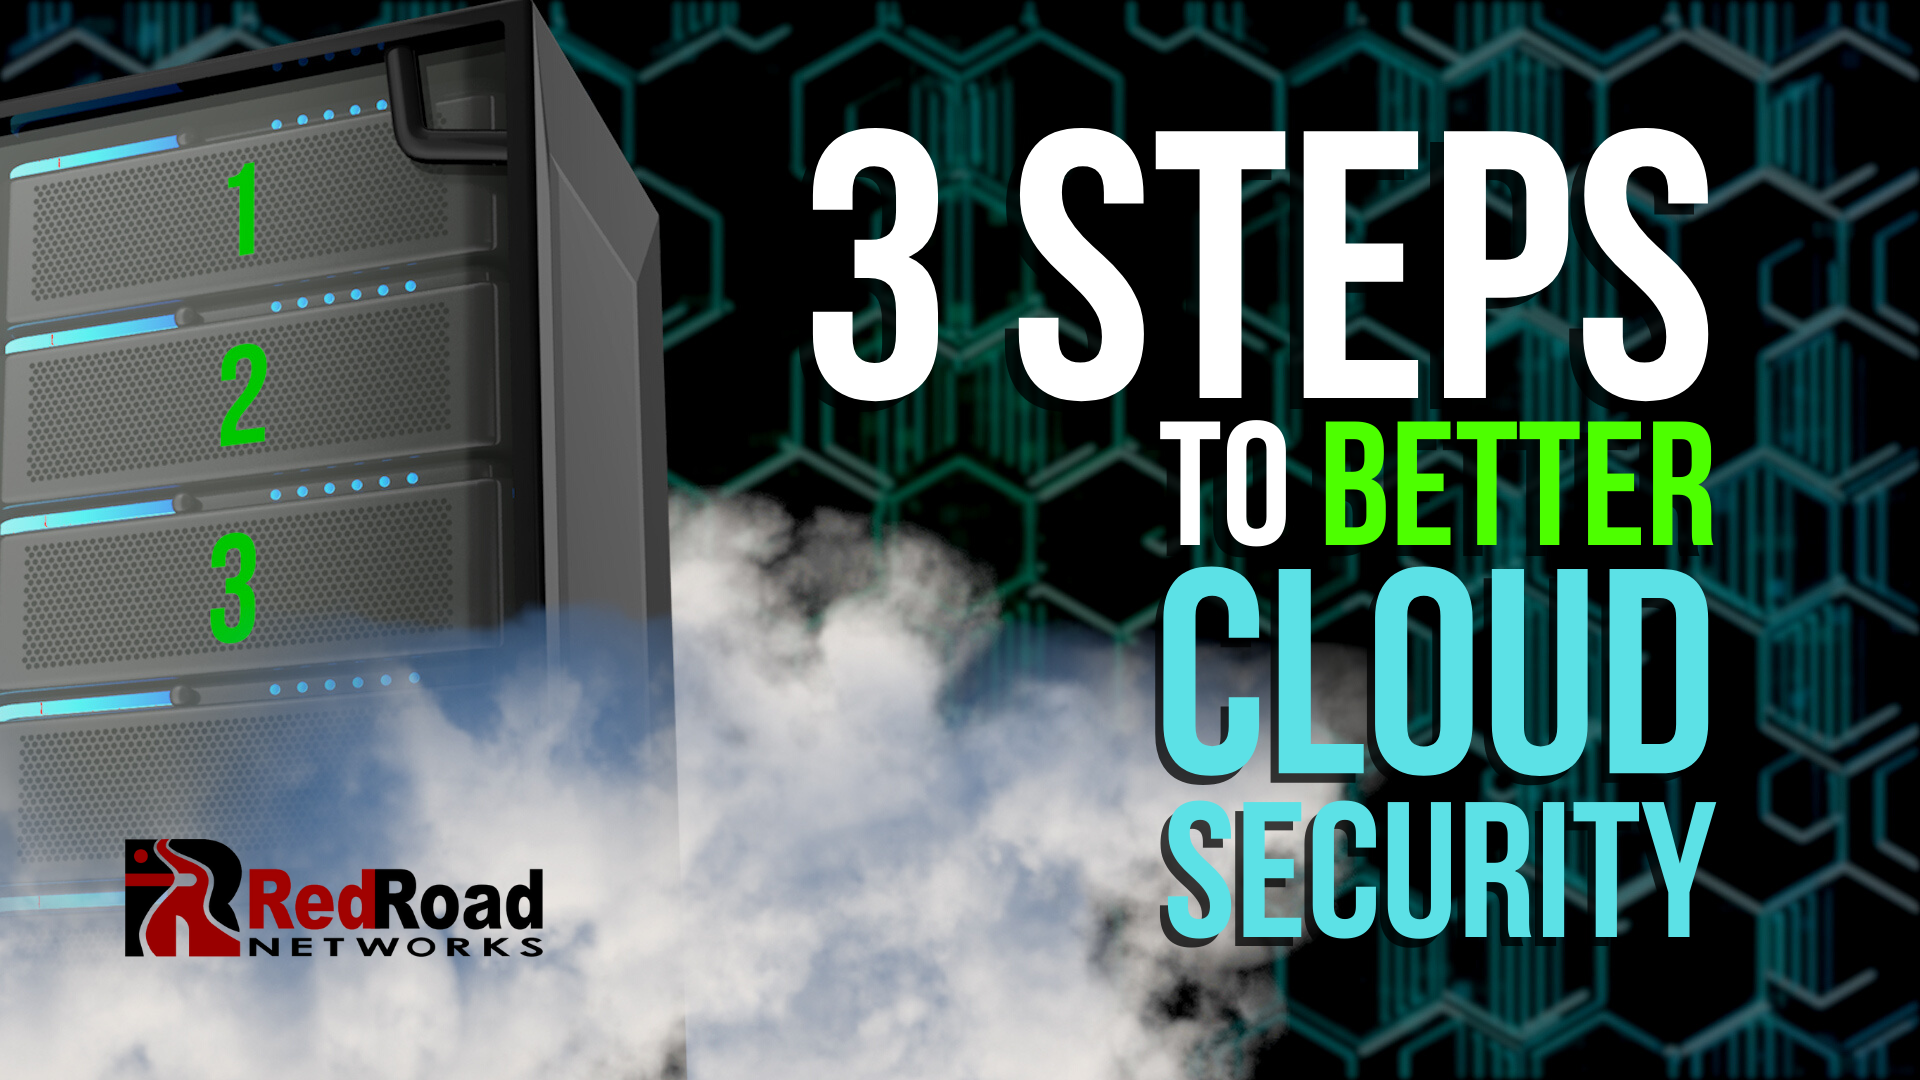 3 steps to better cloud security | IT Services | Cloud security